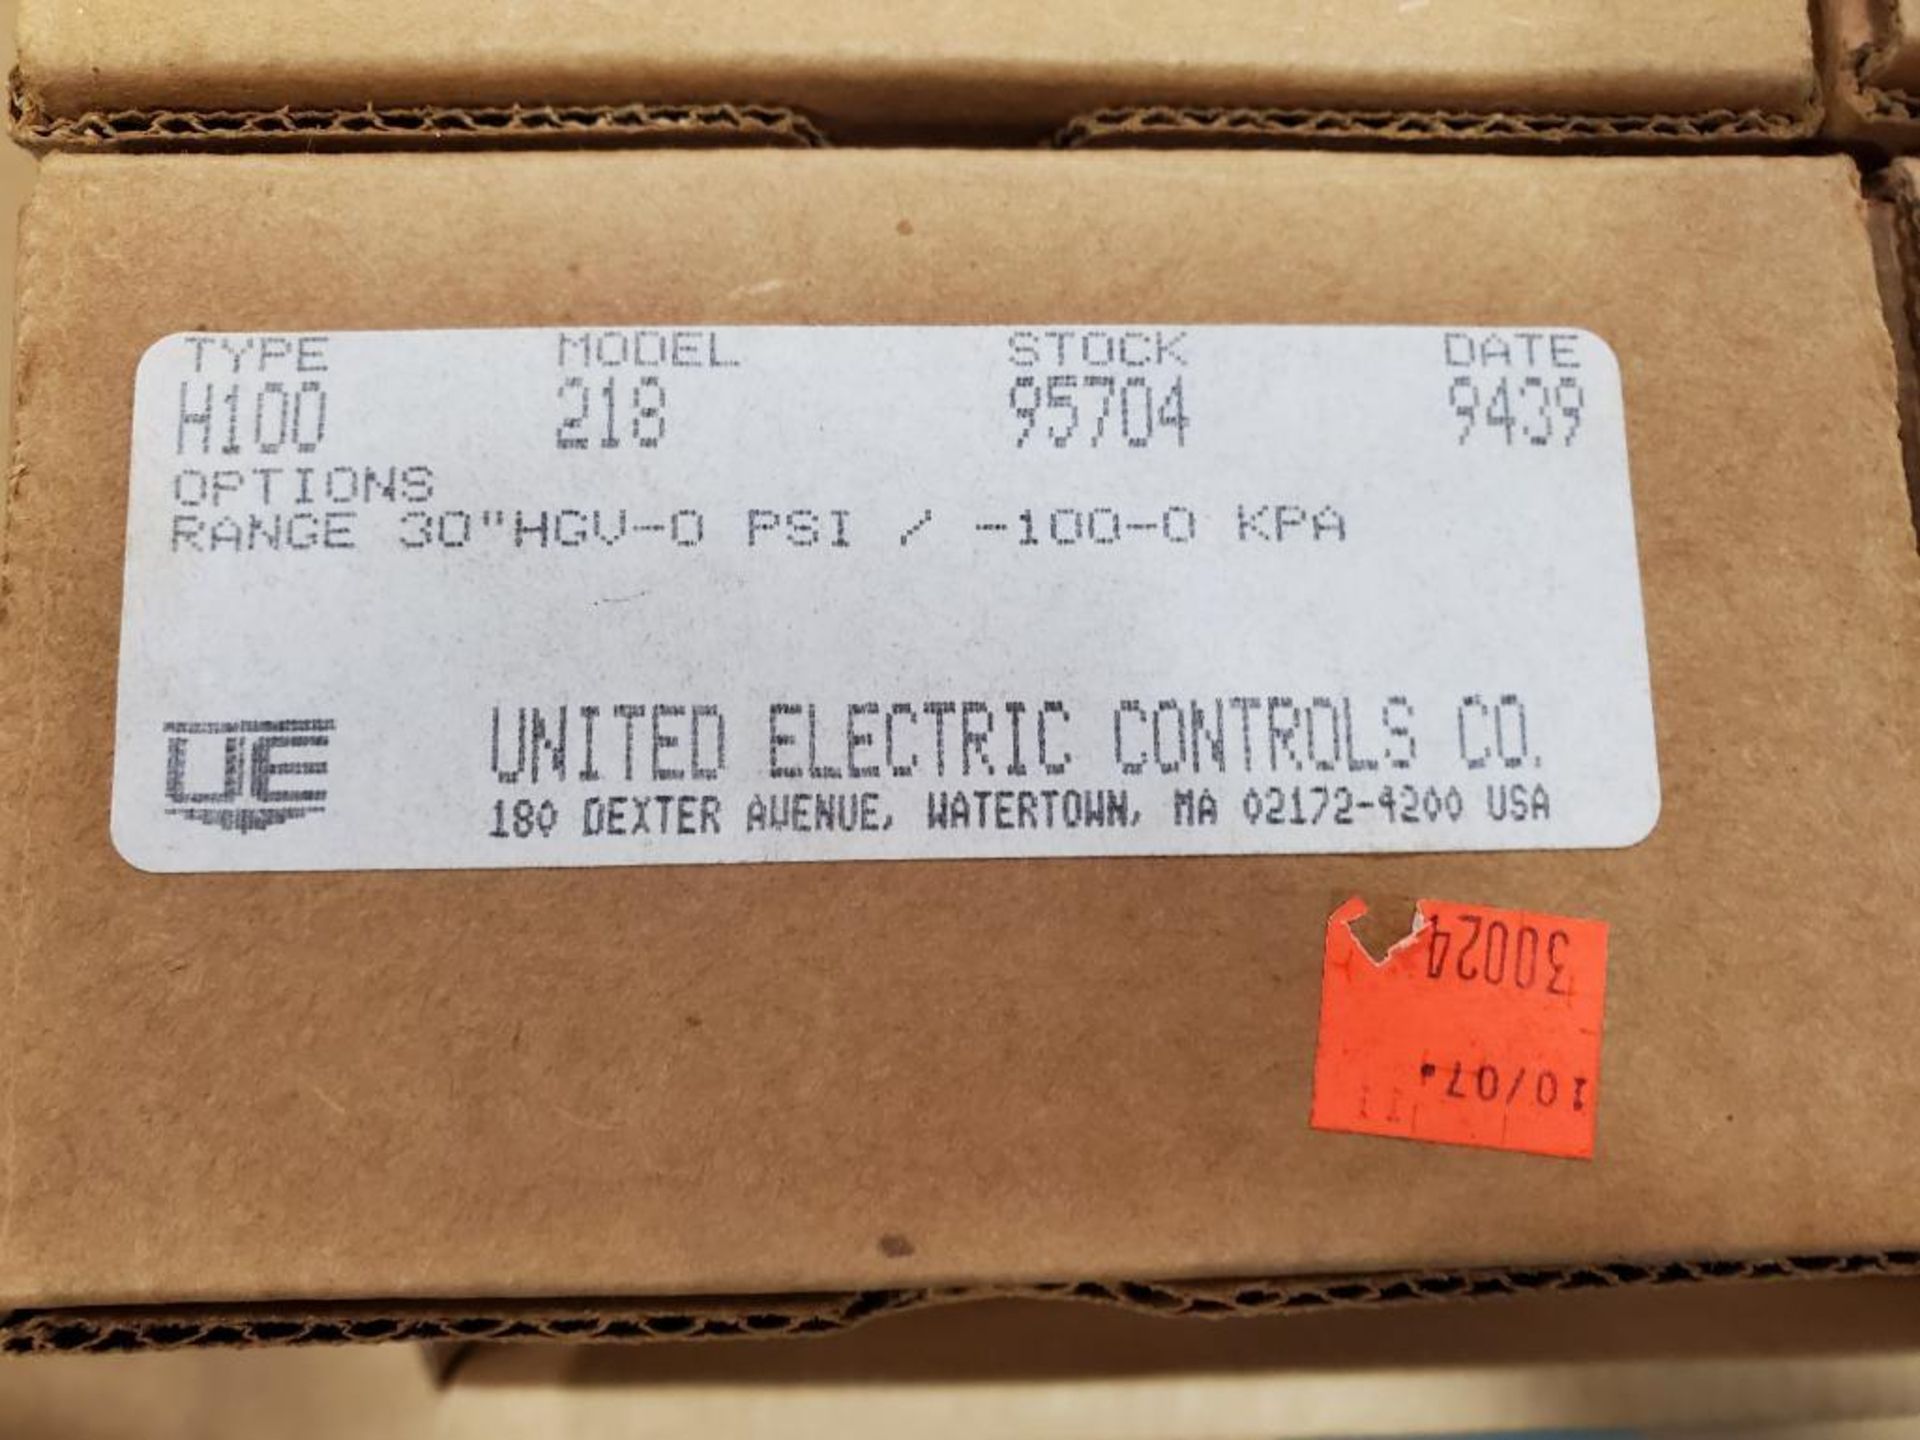 Qty 6 - United Electric controls H100 Model 218 gage. 30" HGV-0 PSI / -100-0 KPA. New in box. - Image 2 of 4